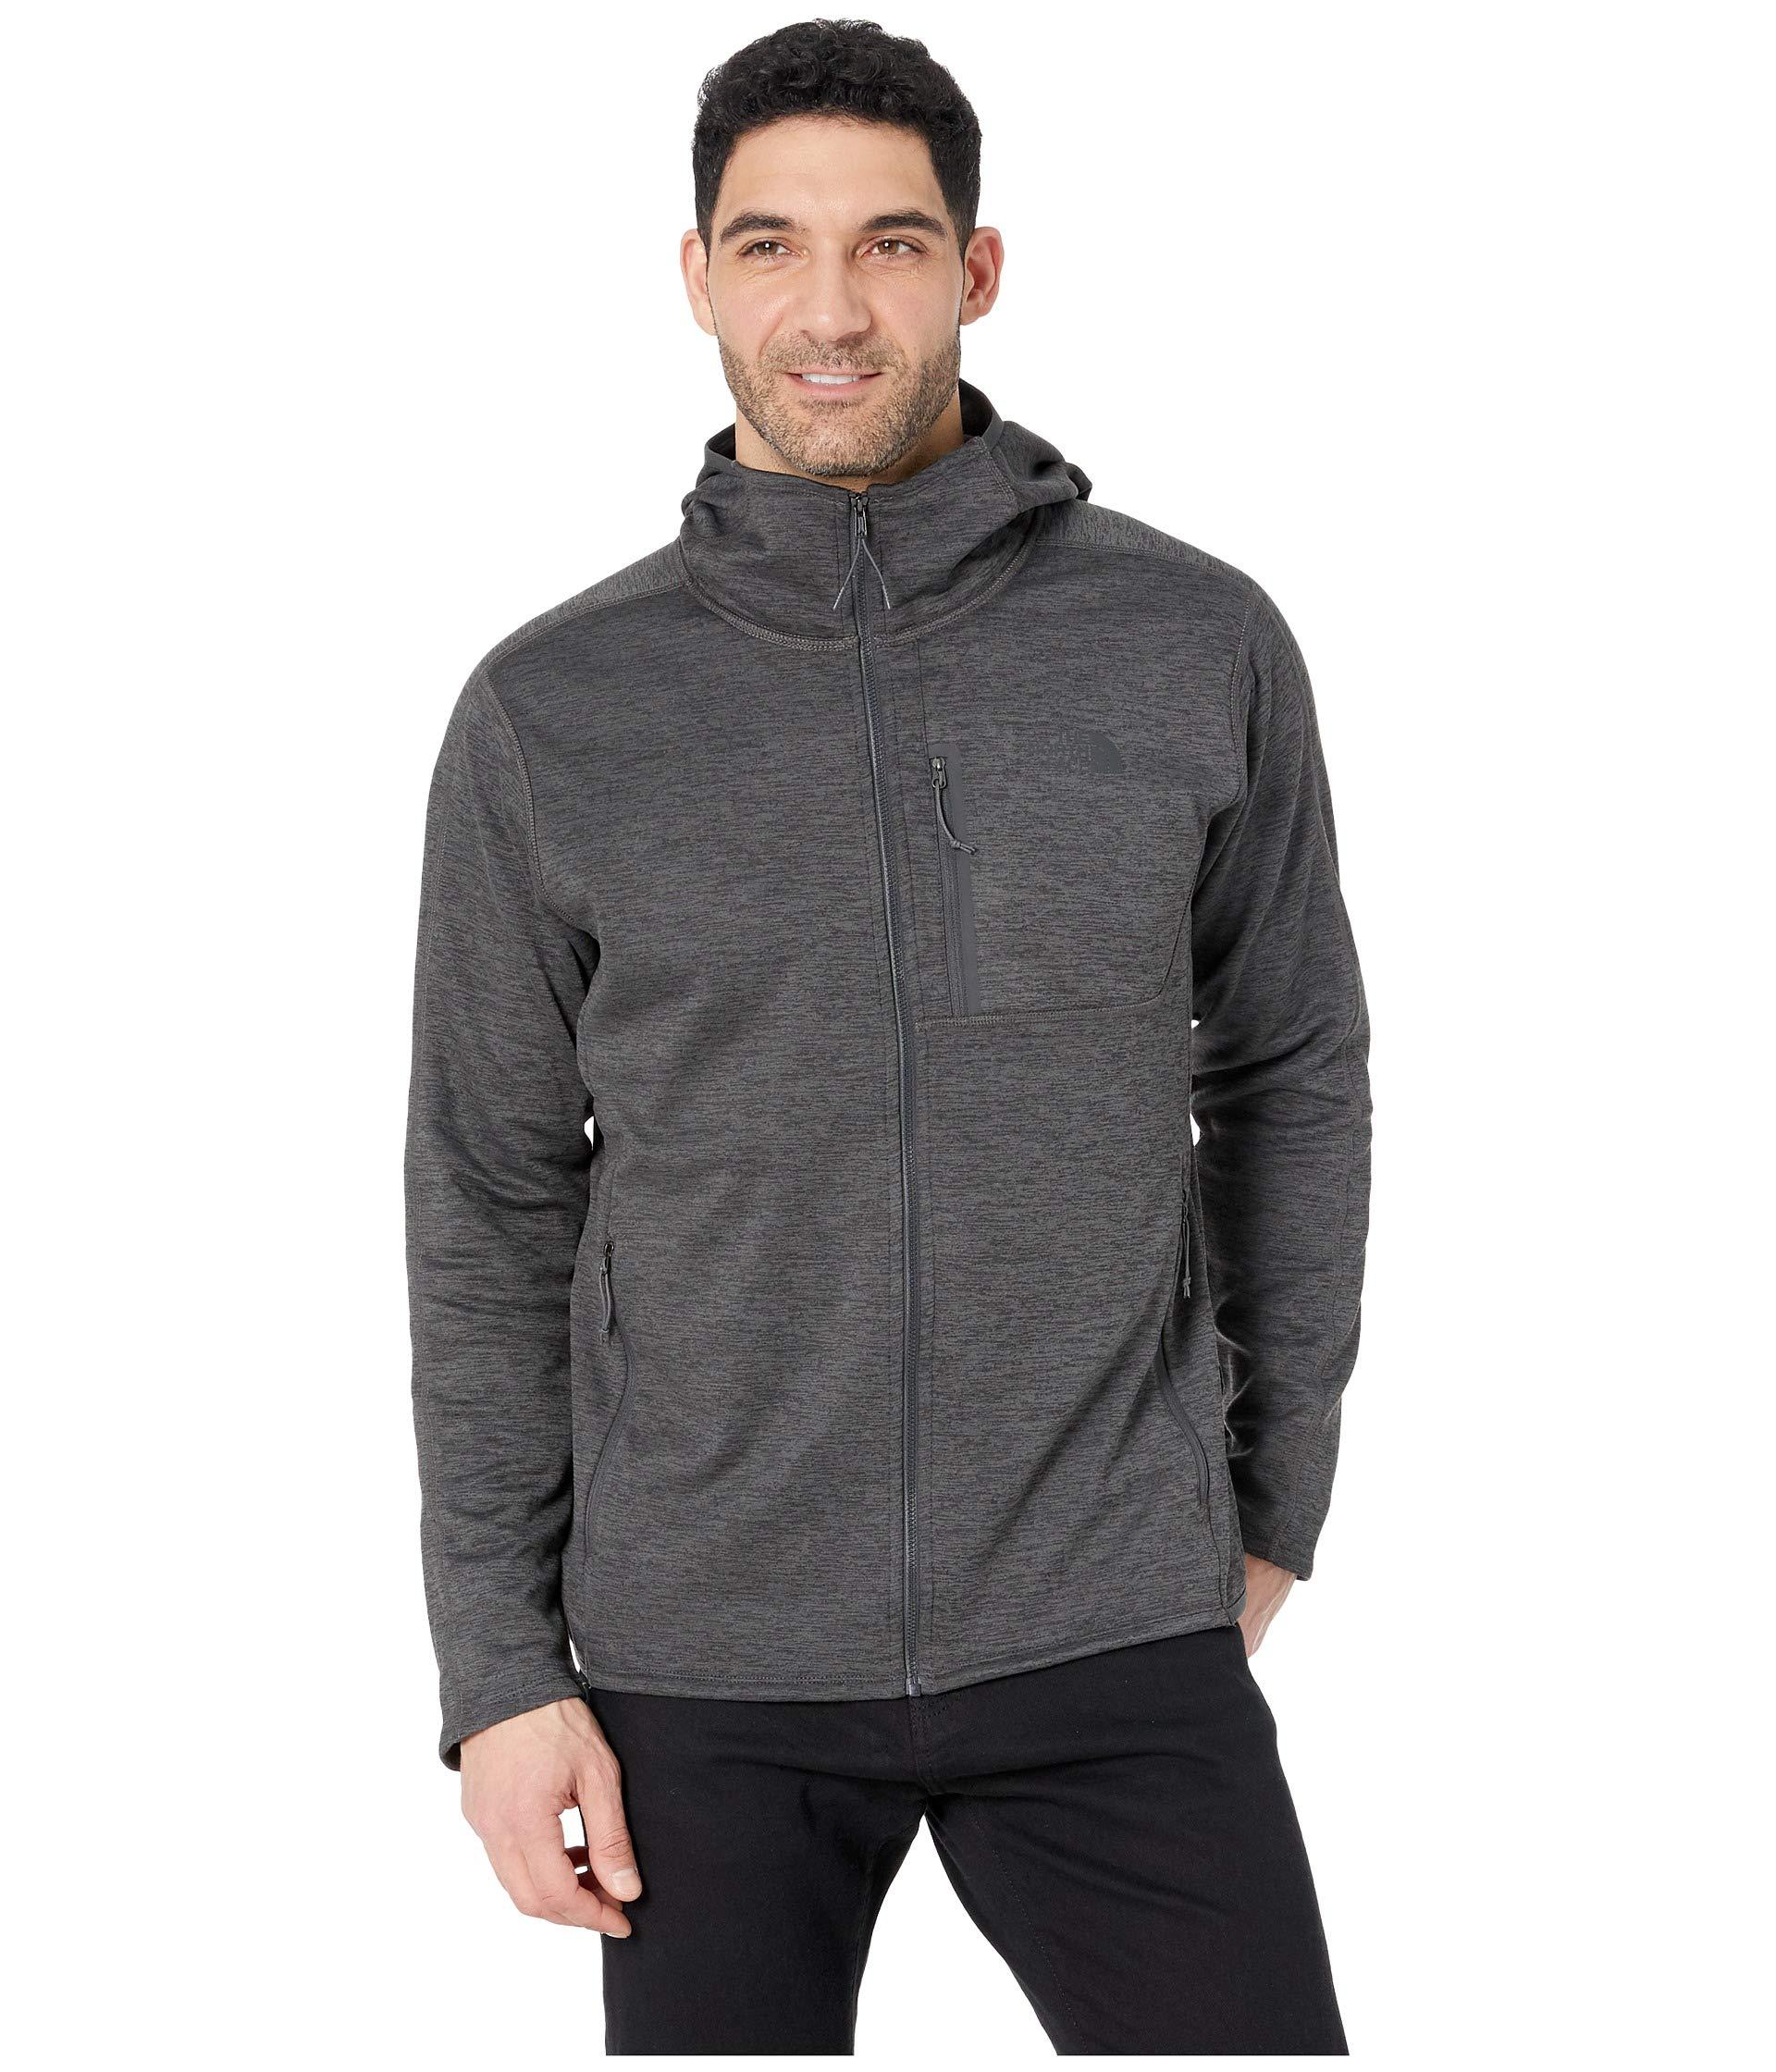 The North Face Fleece Canyonlands Hoodie in Gray for Men - Lyst